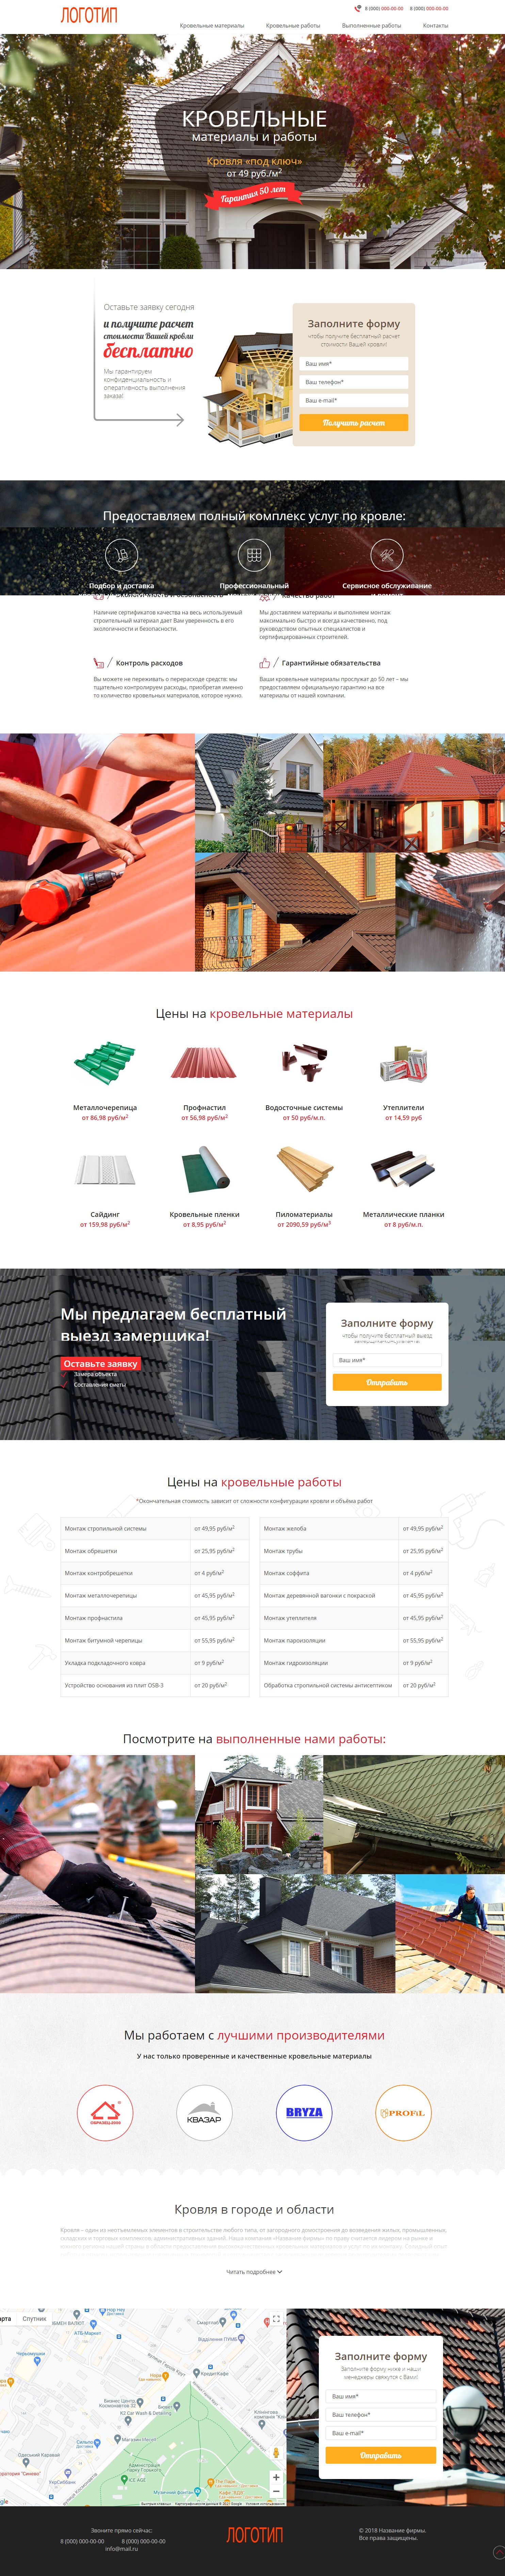 Landing page - Roofing works